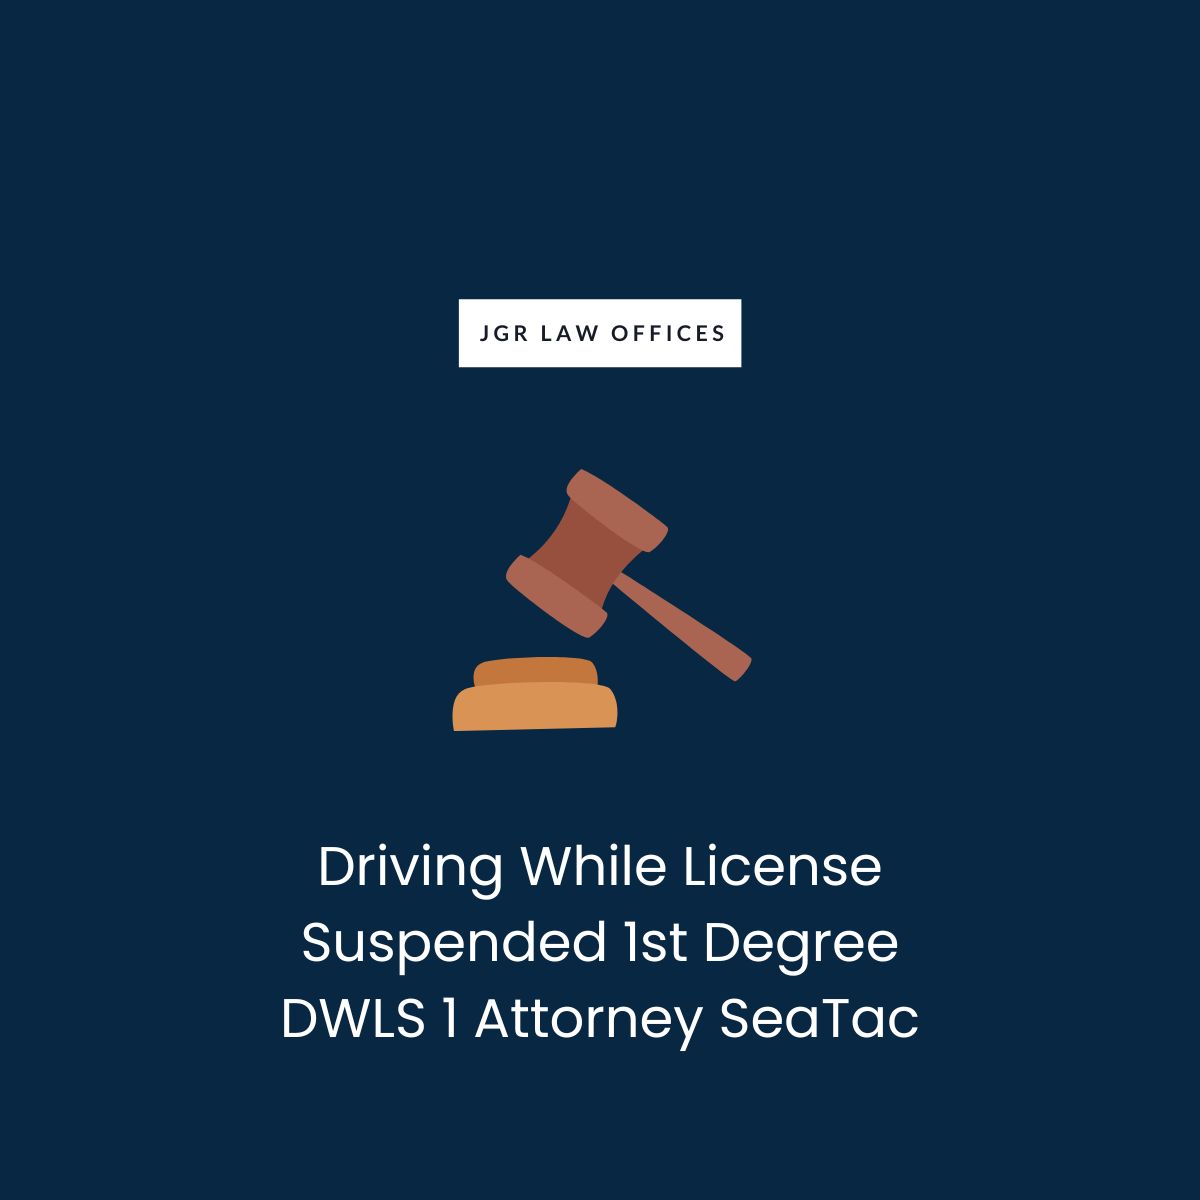 Driving While License Suspended 1st Degree DWLS 1 Attorney SeaTac